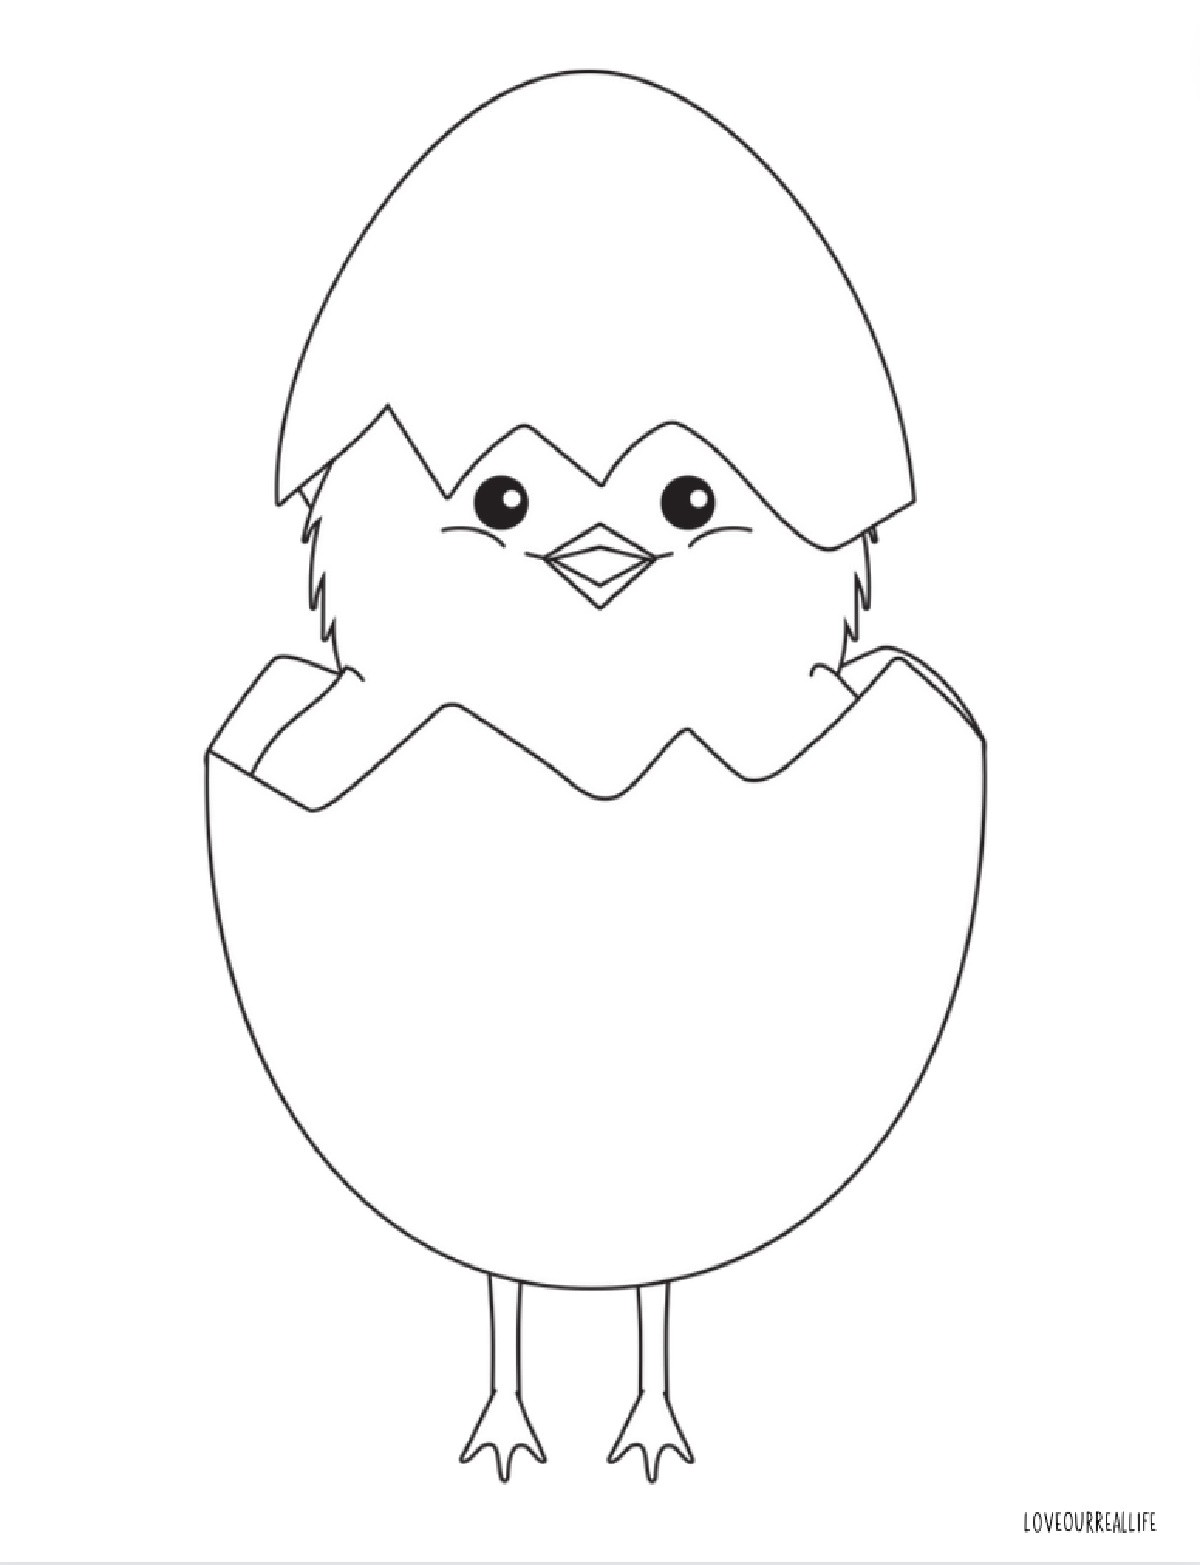 Standing chick with egg shell on head and bottom of body.